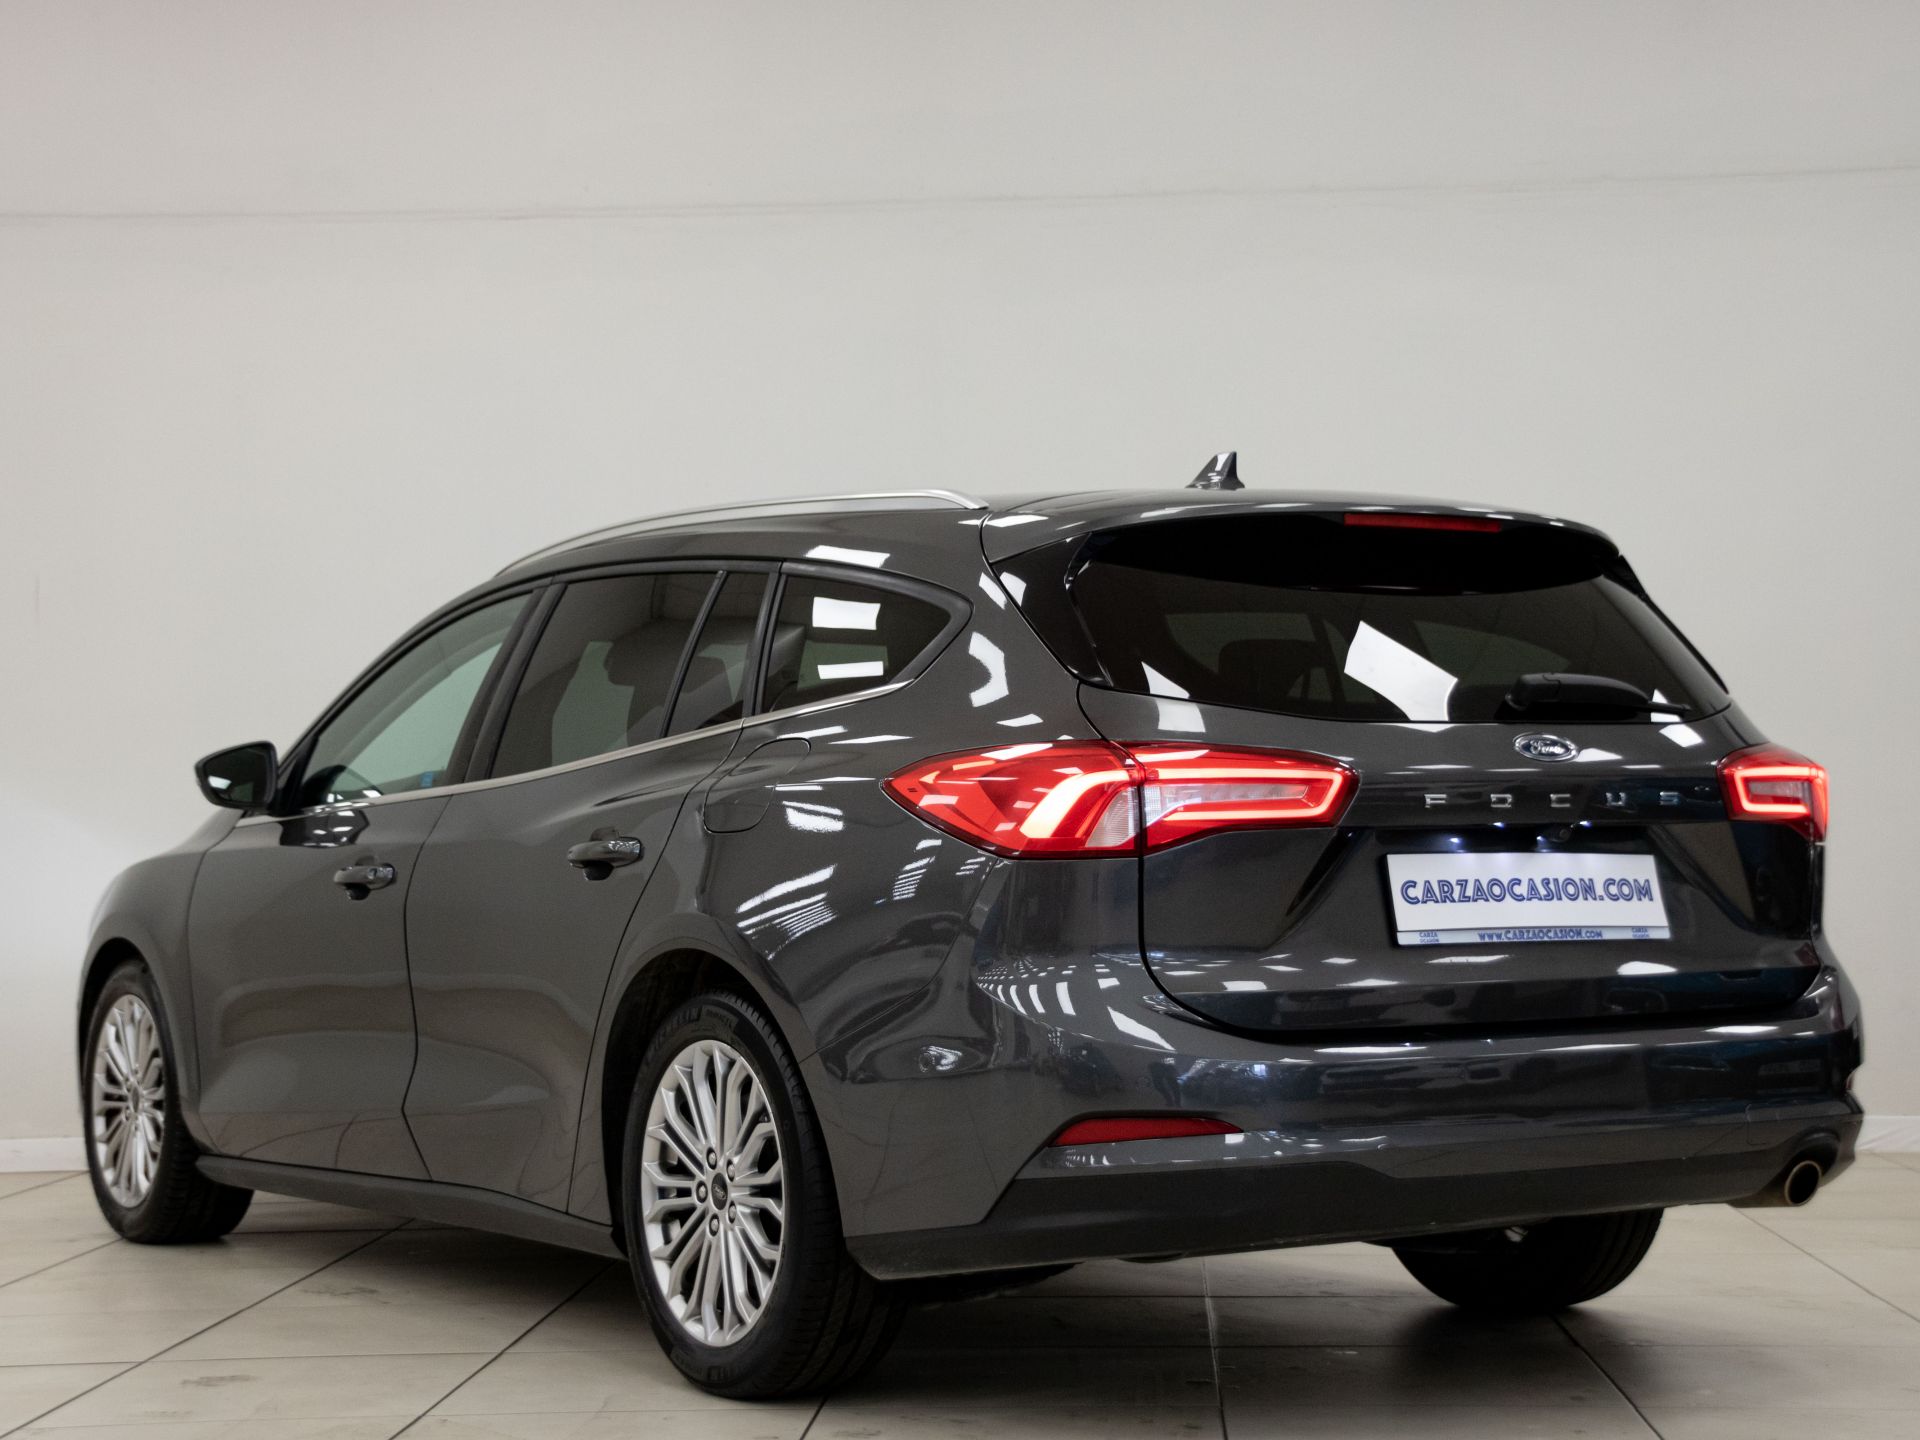 Ford Focus 1.0 Ecoboost 92kW Trend Edition Sportbr